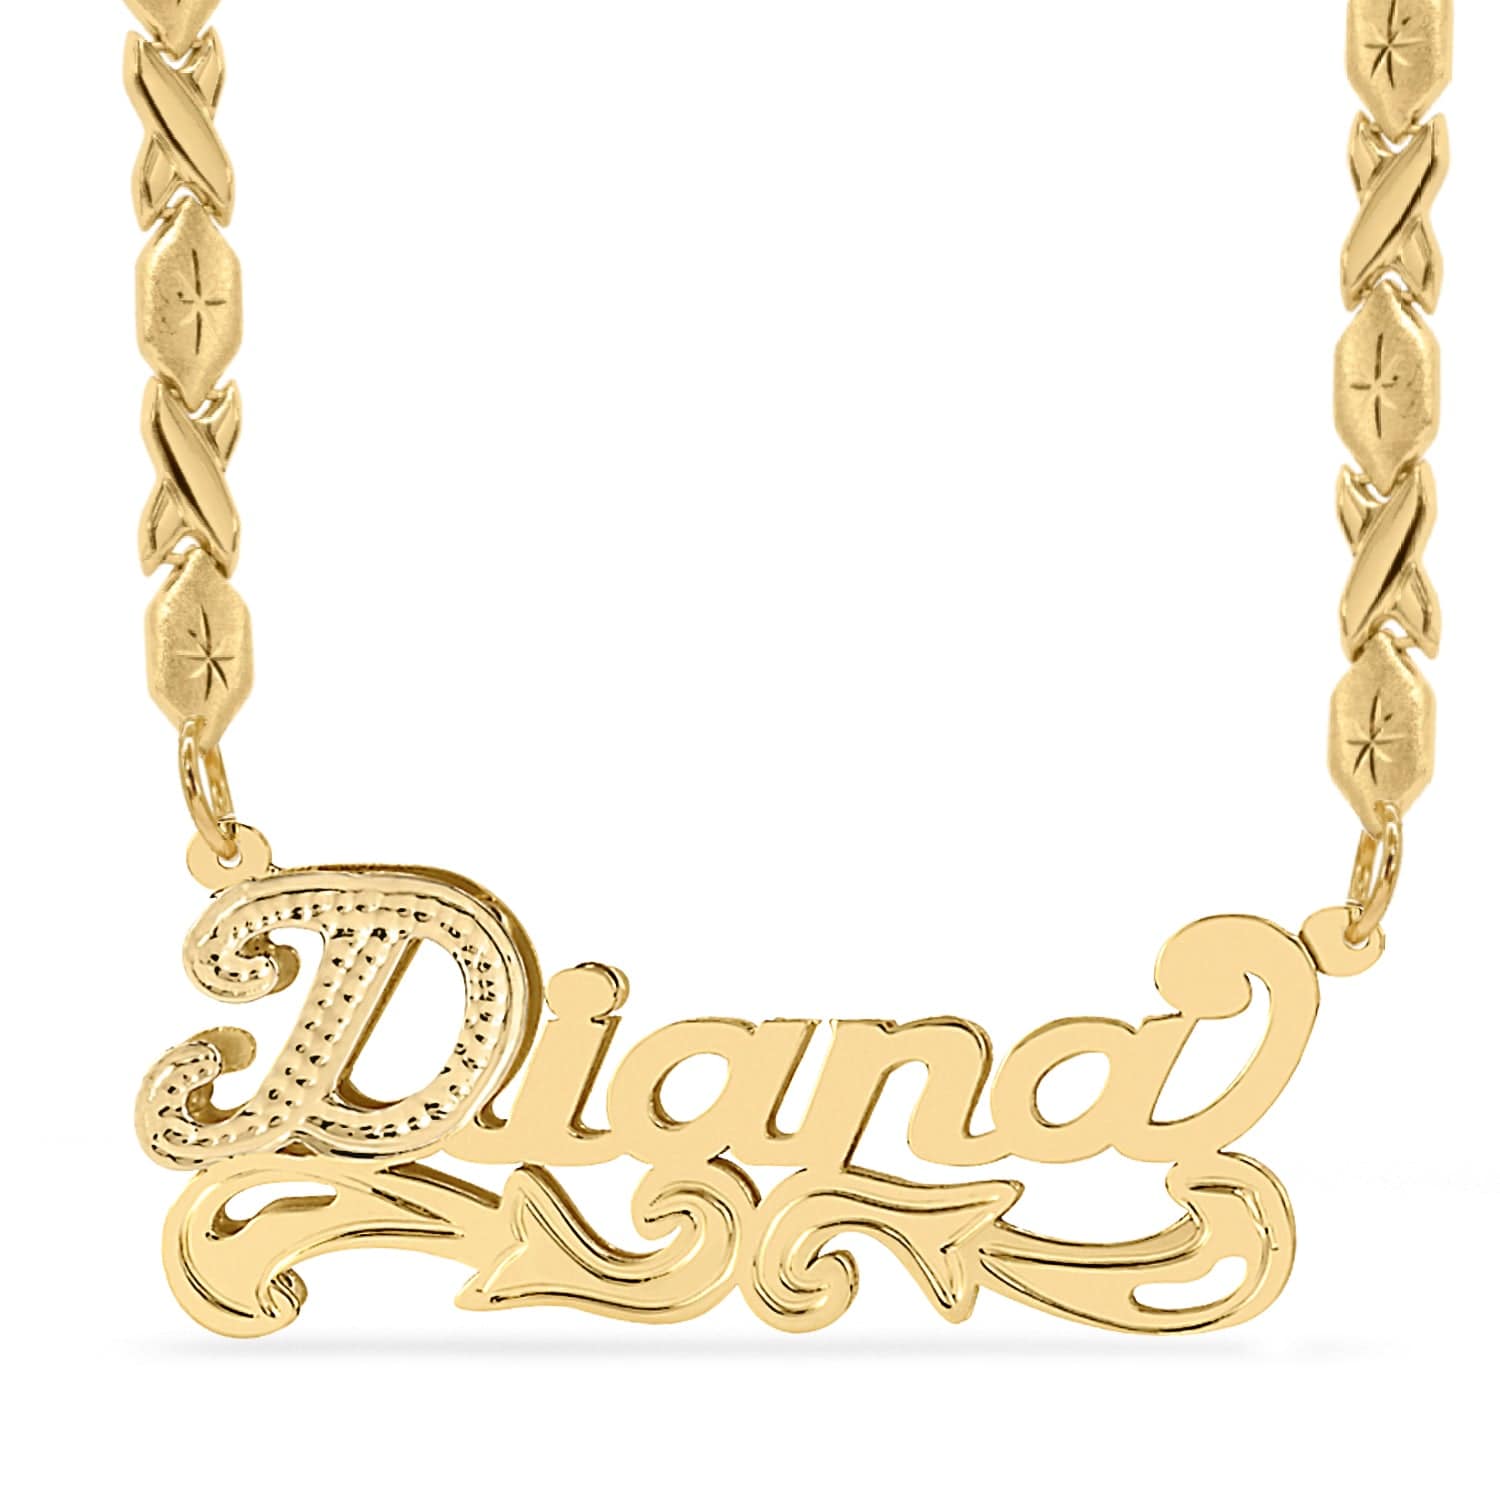 Two-Tone. Sterling Silver / Xoxo Chain Double Plated Nameplate Necklace "Diana" with Xoxo chain